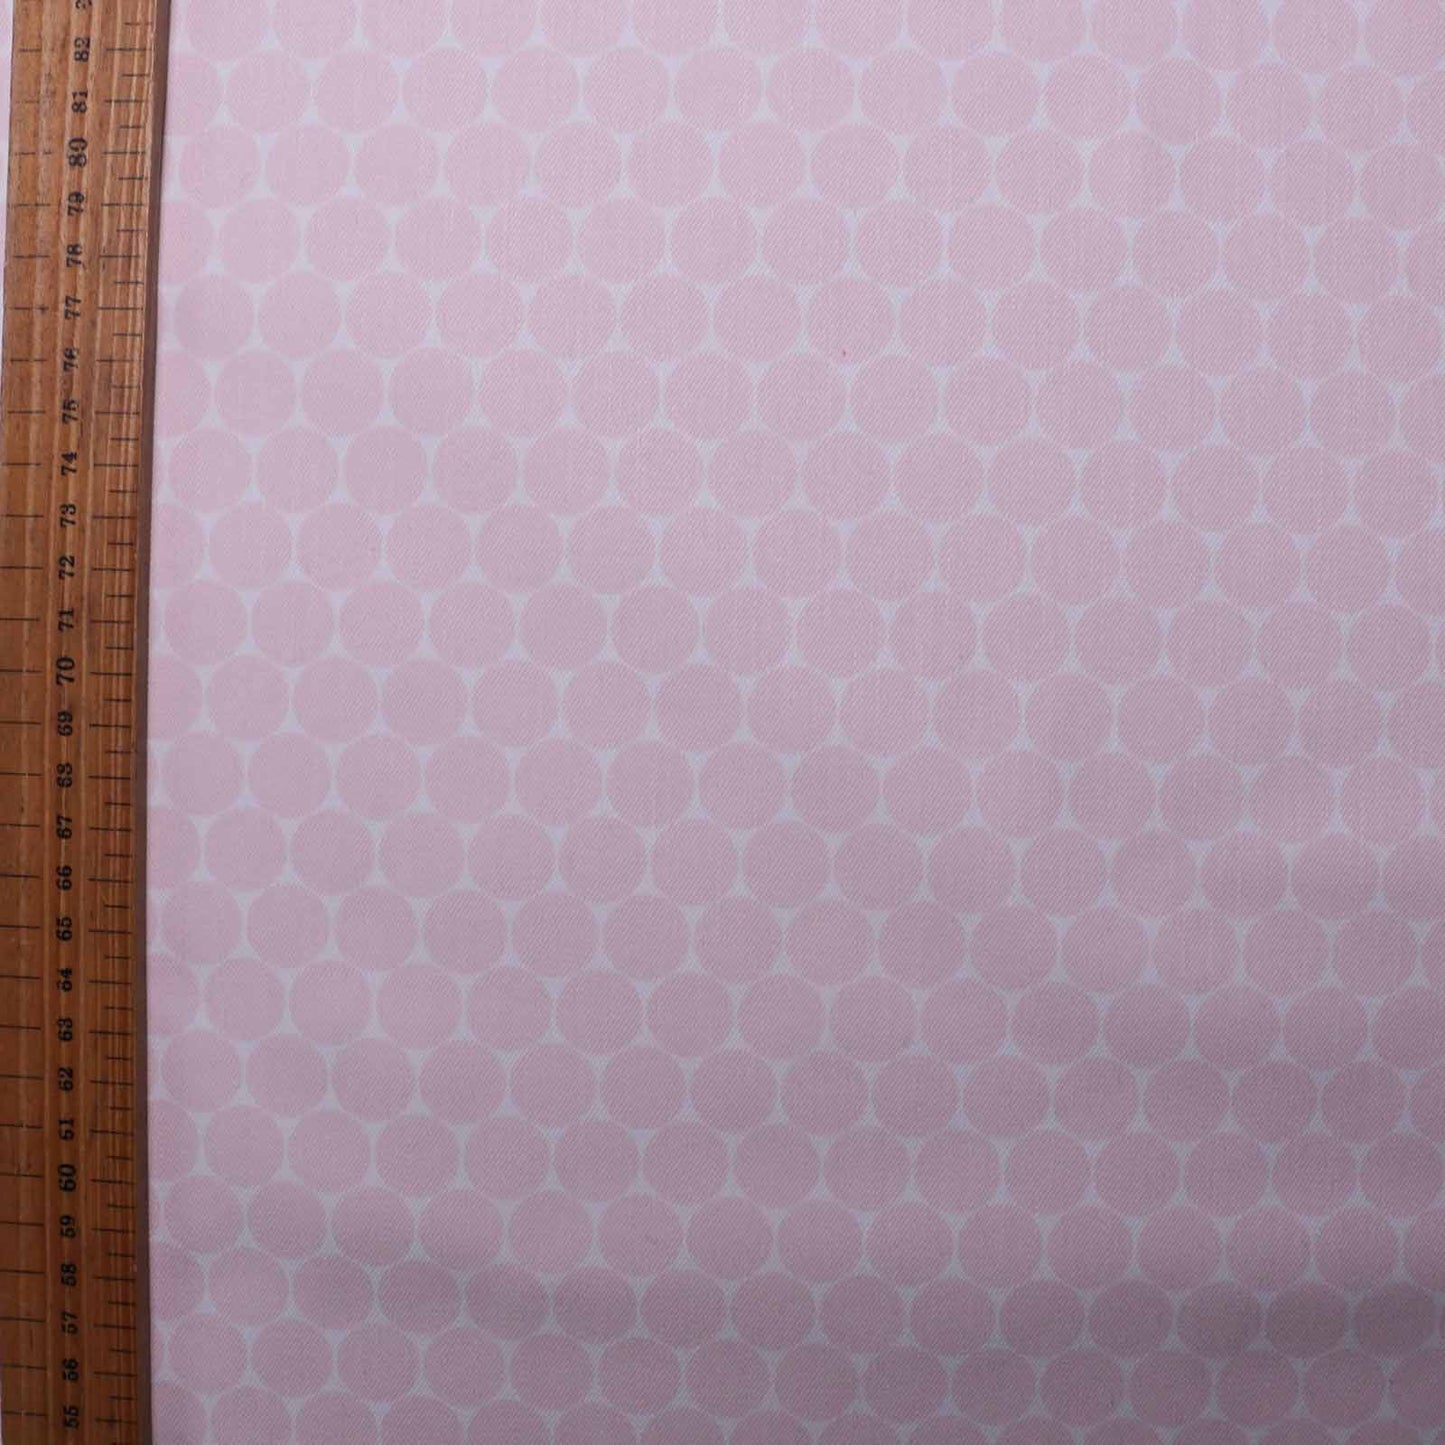 metre stretchy cotton twill dressmaking fabric with pale pink and white dot design